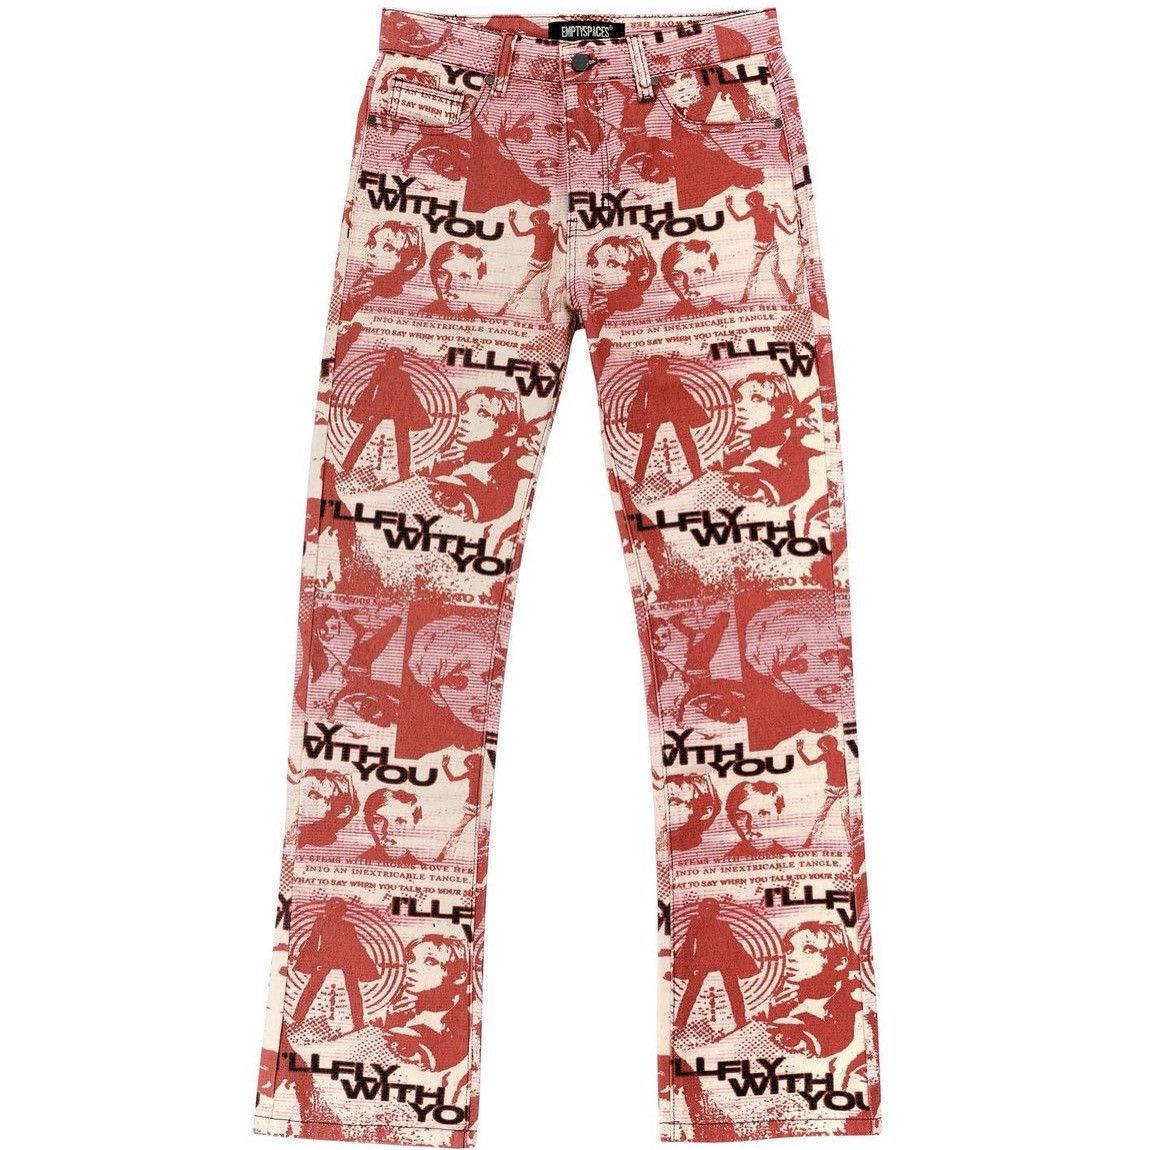 Hysteric Glamour Hysteric glamour type pants empty space tagged | Grailed